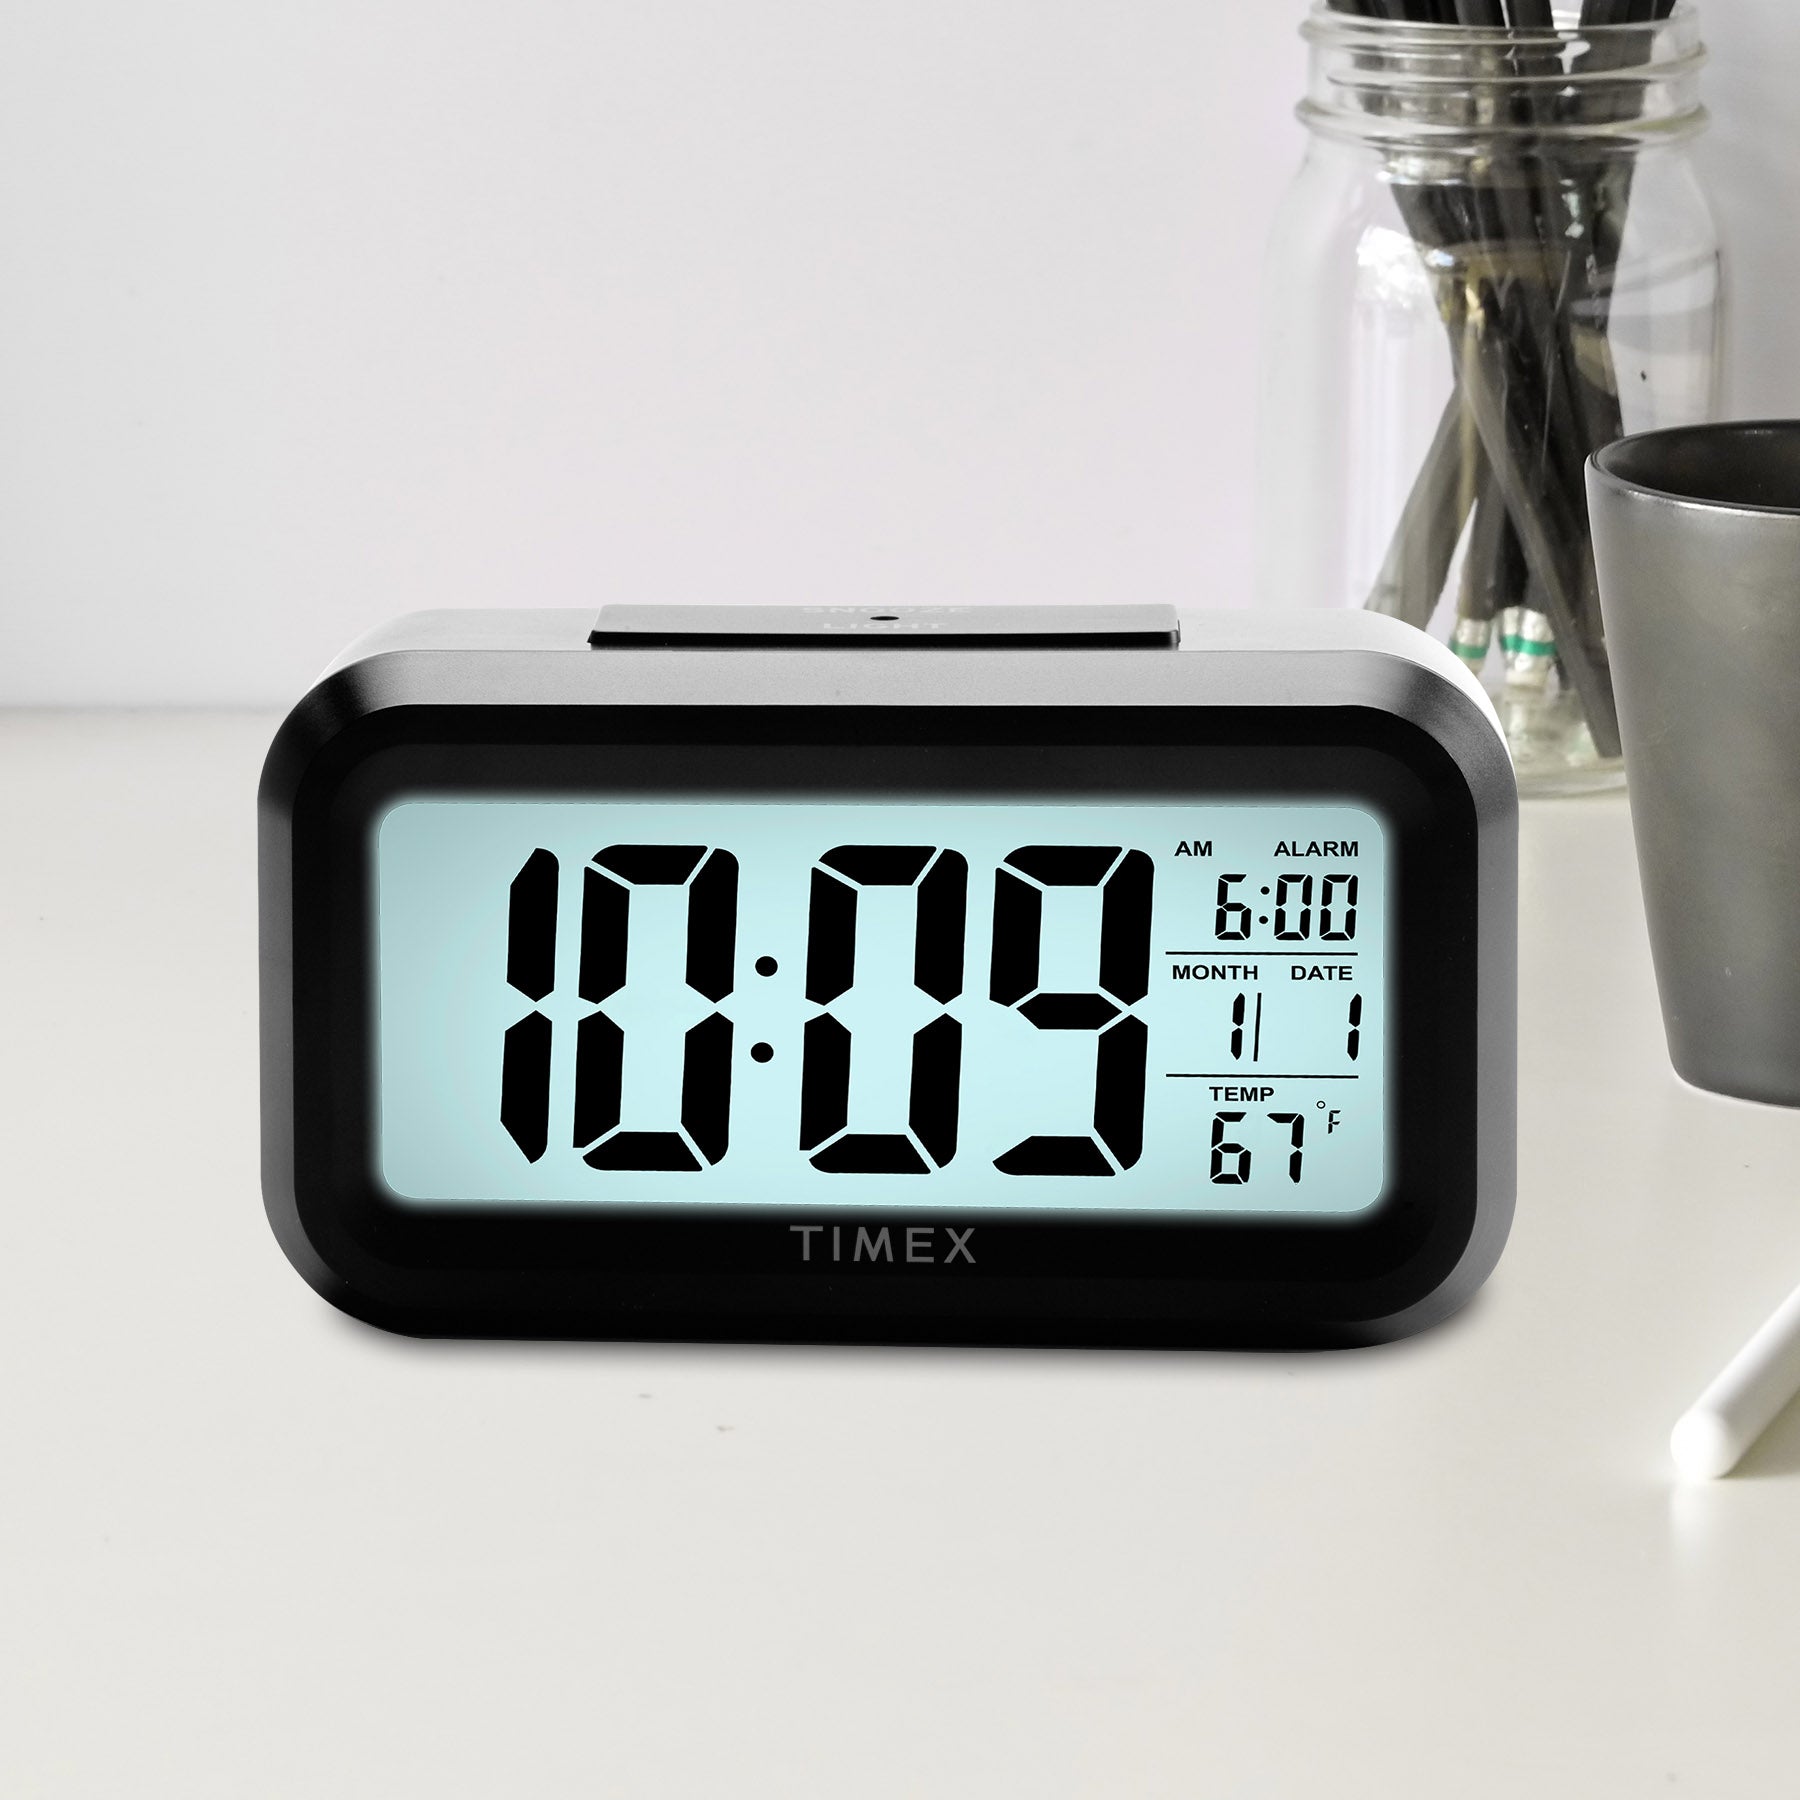 Timex Alarm Clock with Large Display, Cordless and Portable – Black (T108B)